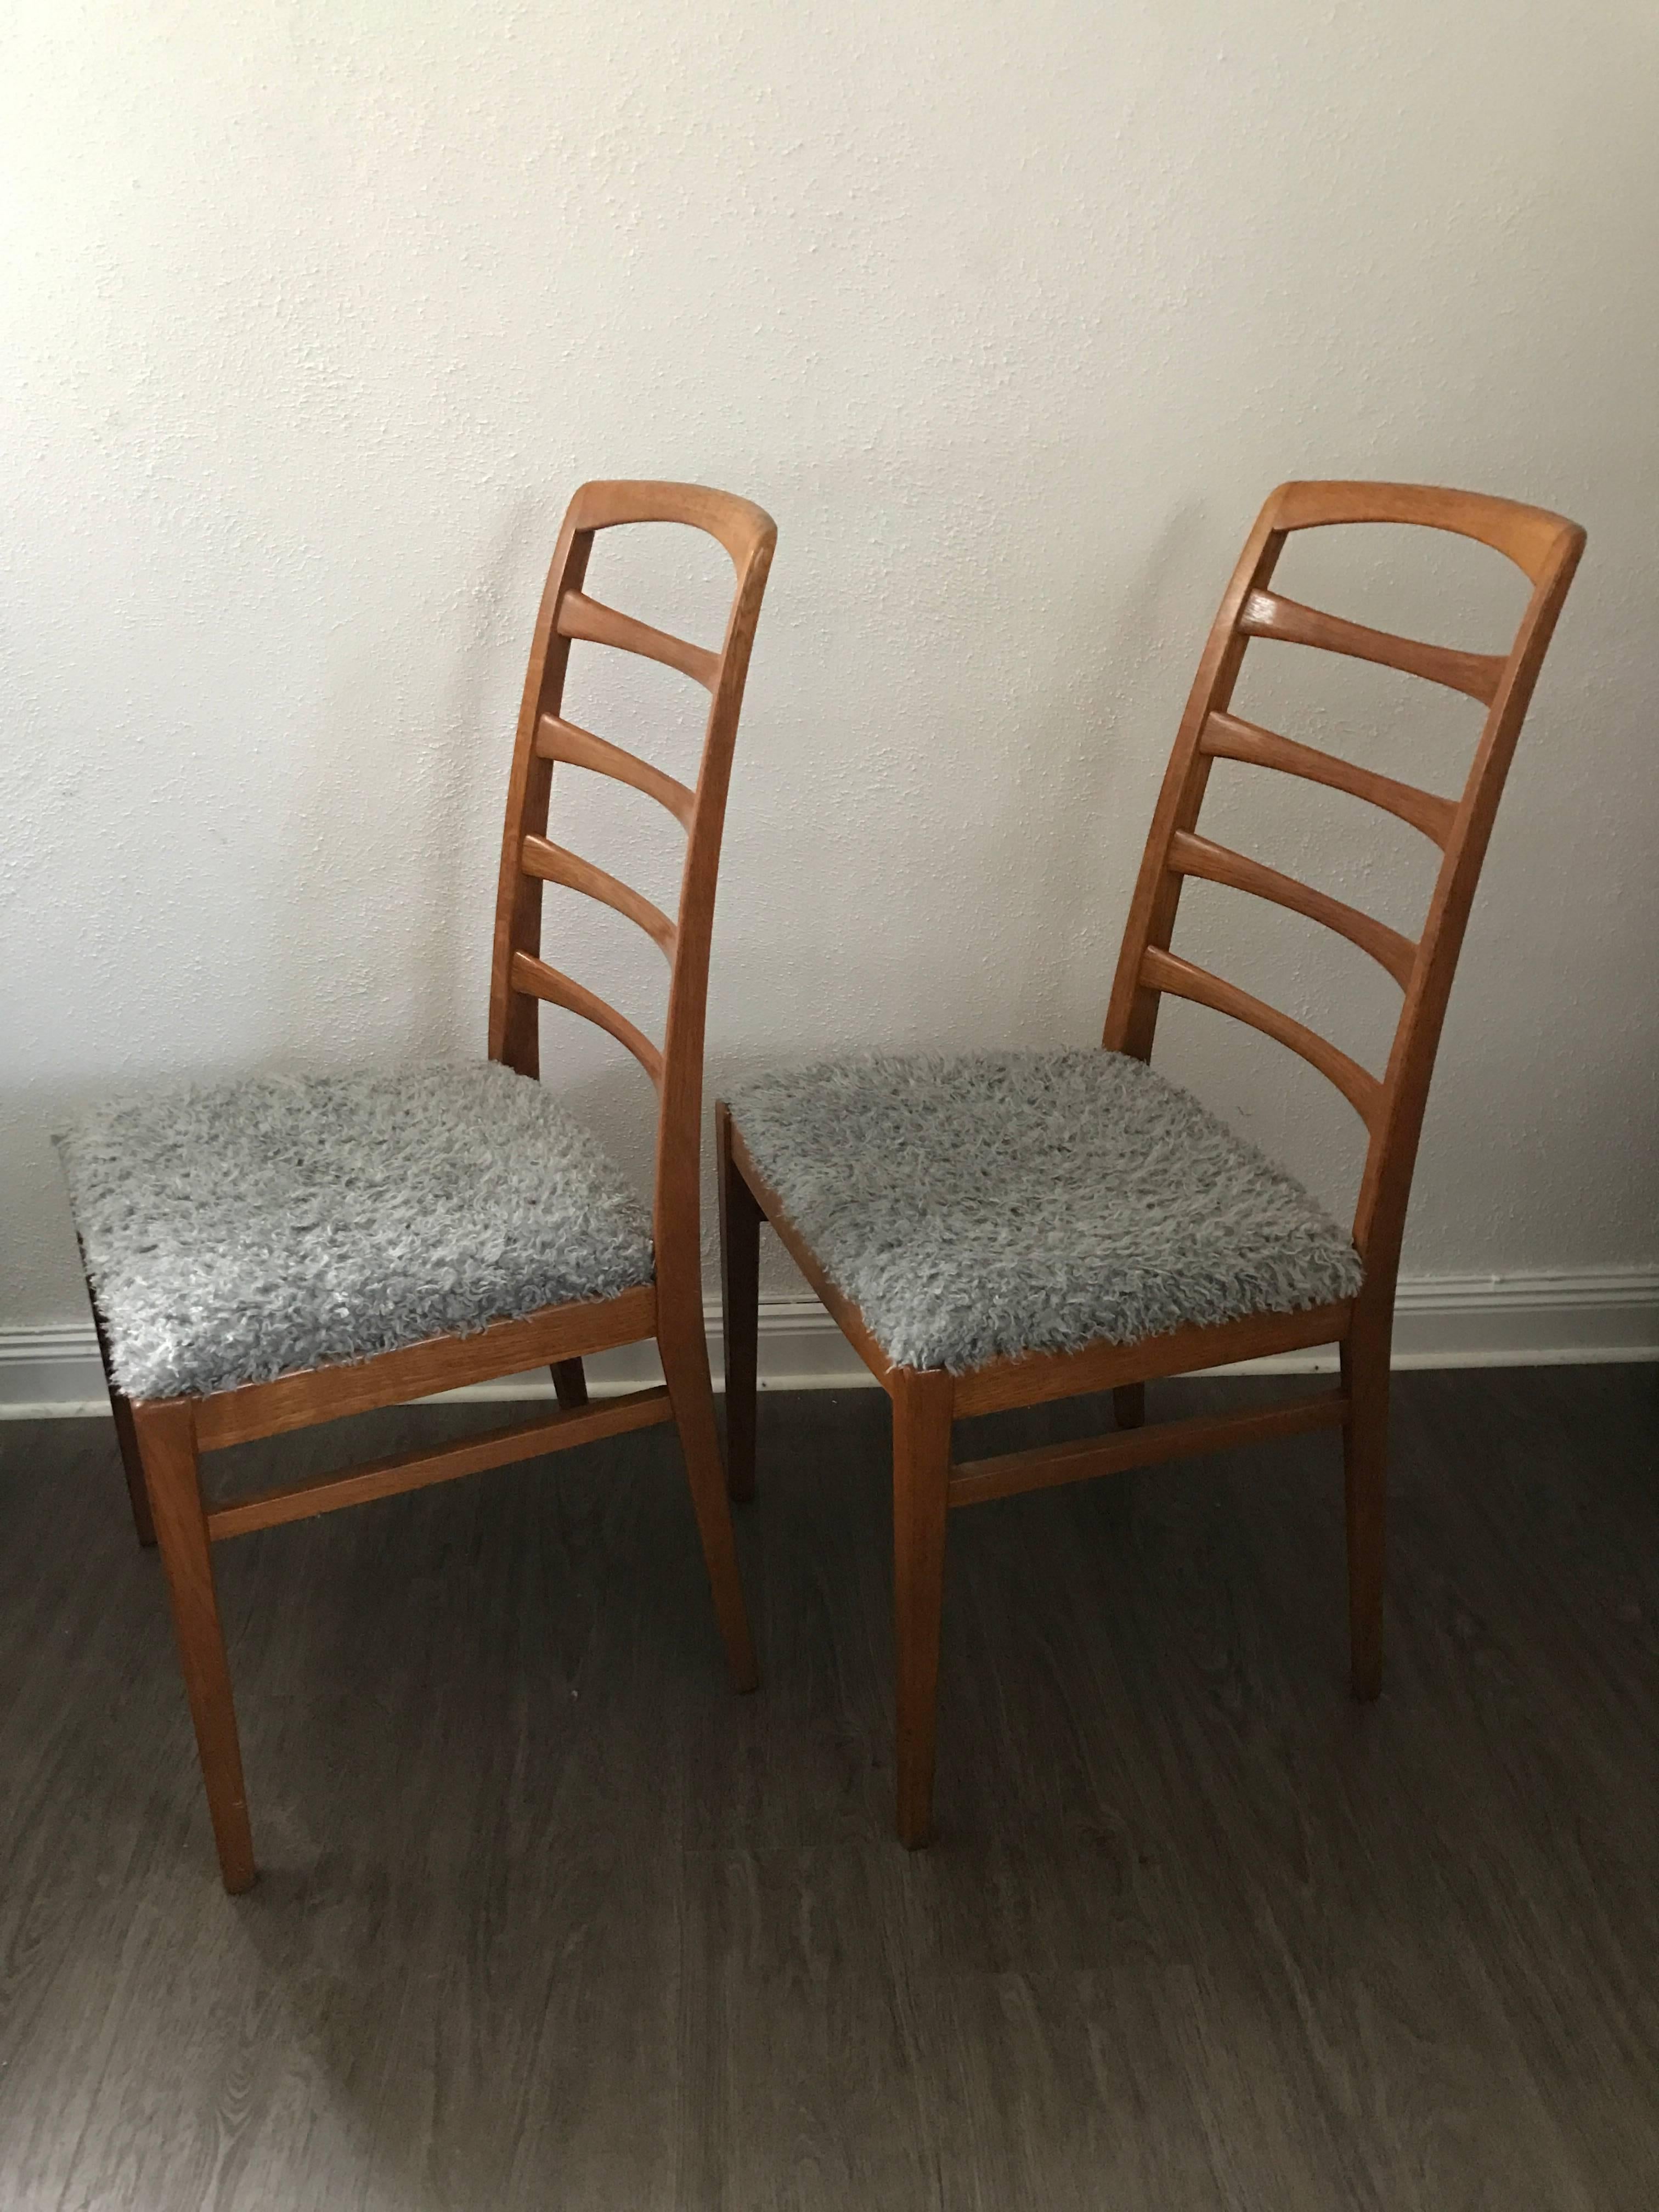 1957 Reno oak Bodafors Swedish designer chairs Bertil Fridhagen eight chairs.
Very beautiful designer oak chairs designed by priced and famous designer Bertil Fridhagen for Bodafors. Bodafors was one of the greatest furniture manufacturing company